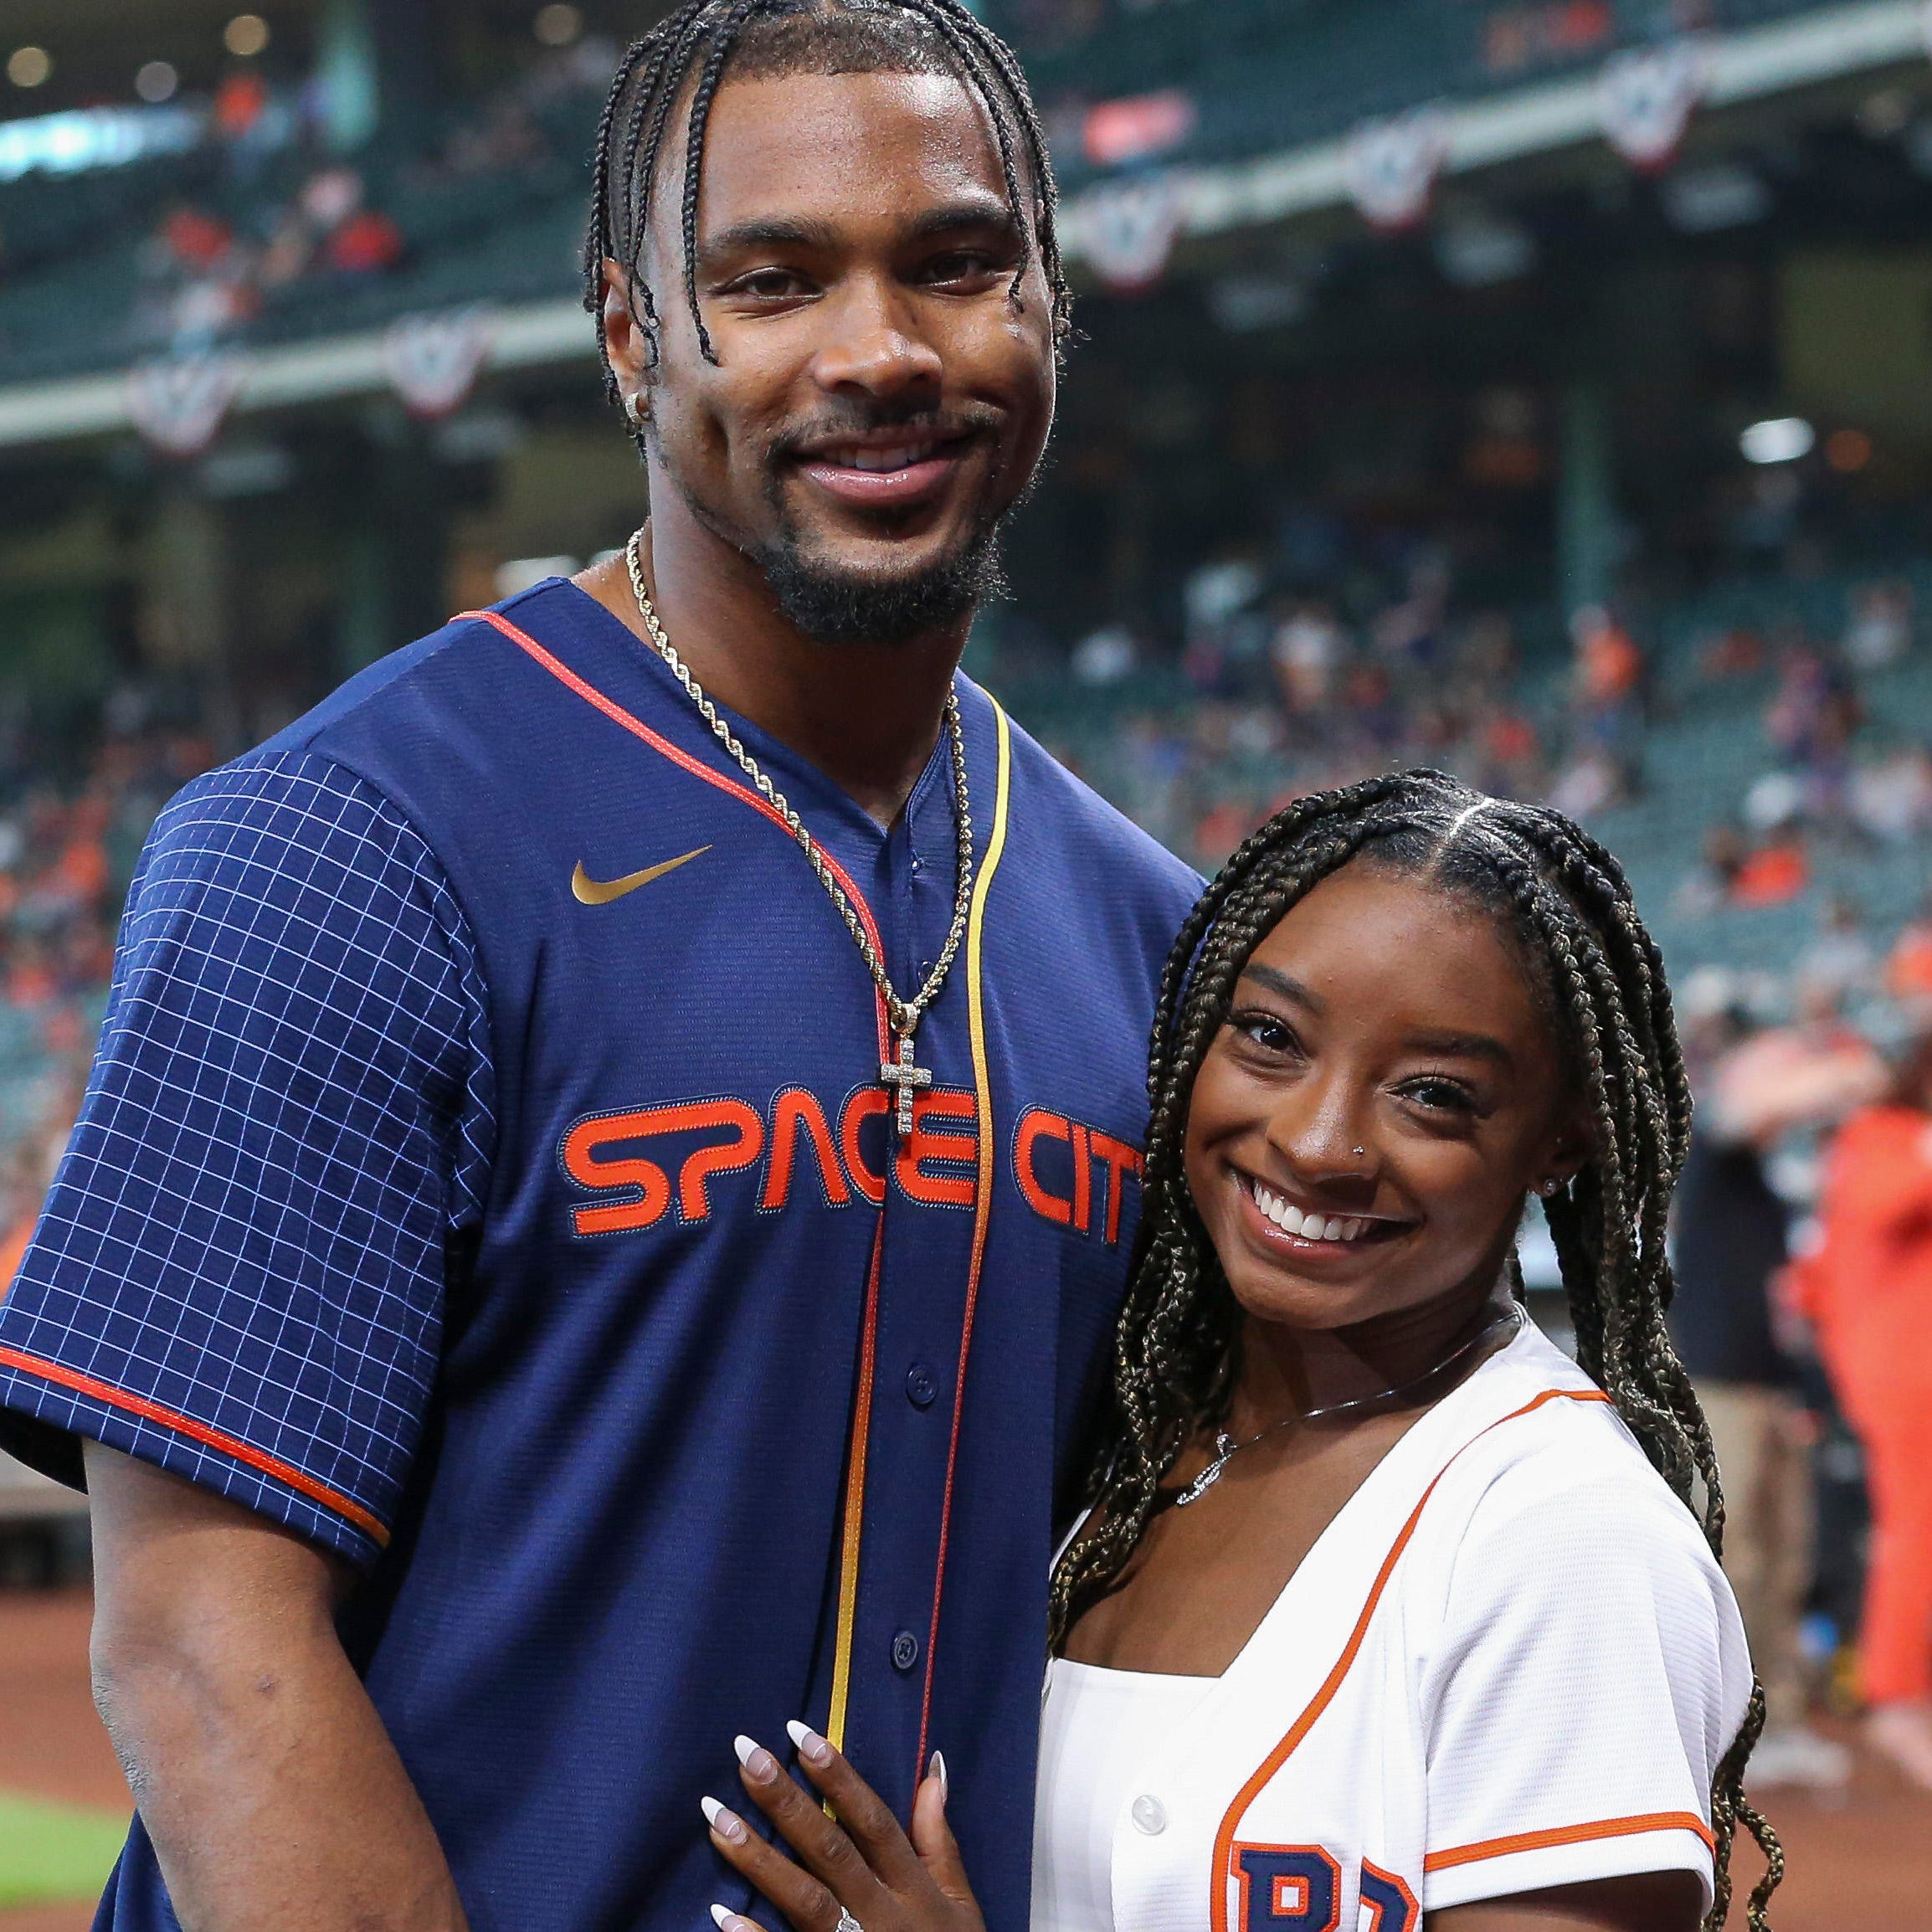 Gymnast Simone Biles and Houston Texans defensive back Jonathan Owens pose for a picture before a Houston Astros game on April 18, 2022.